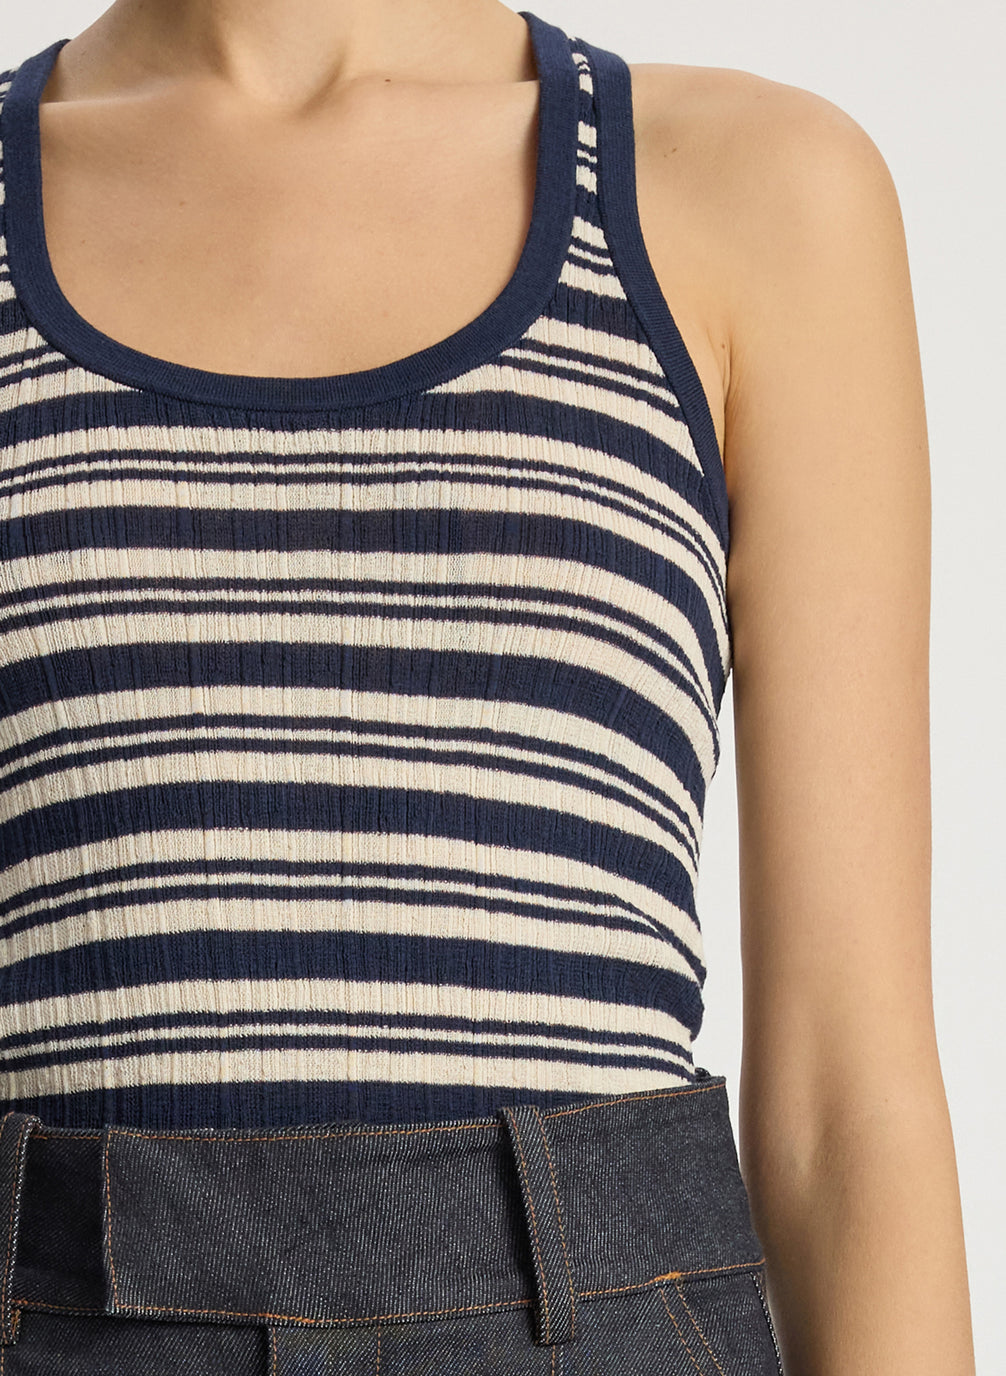 detail view of woman wearing navy blue striped tank top and dark wash raw denim jeans